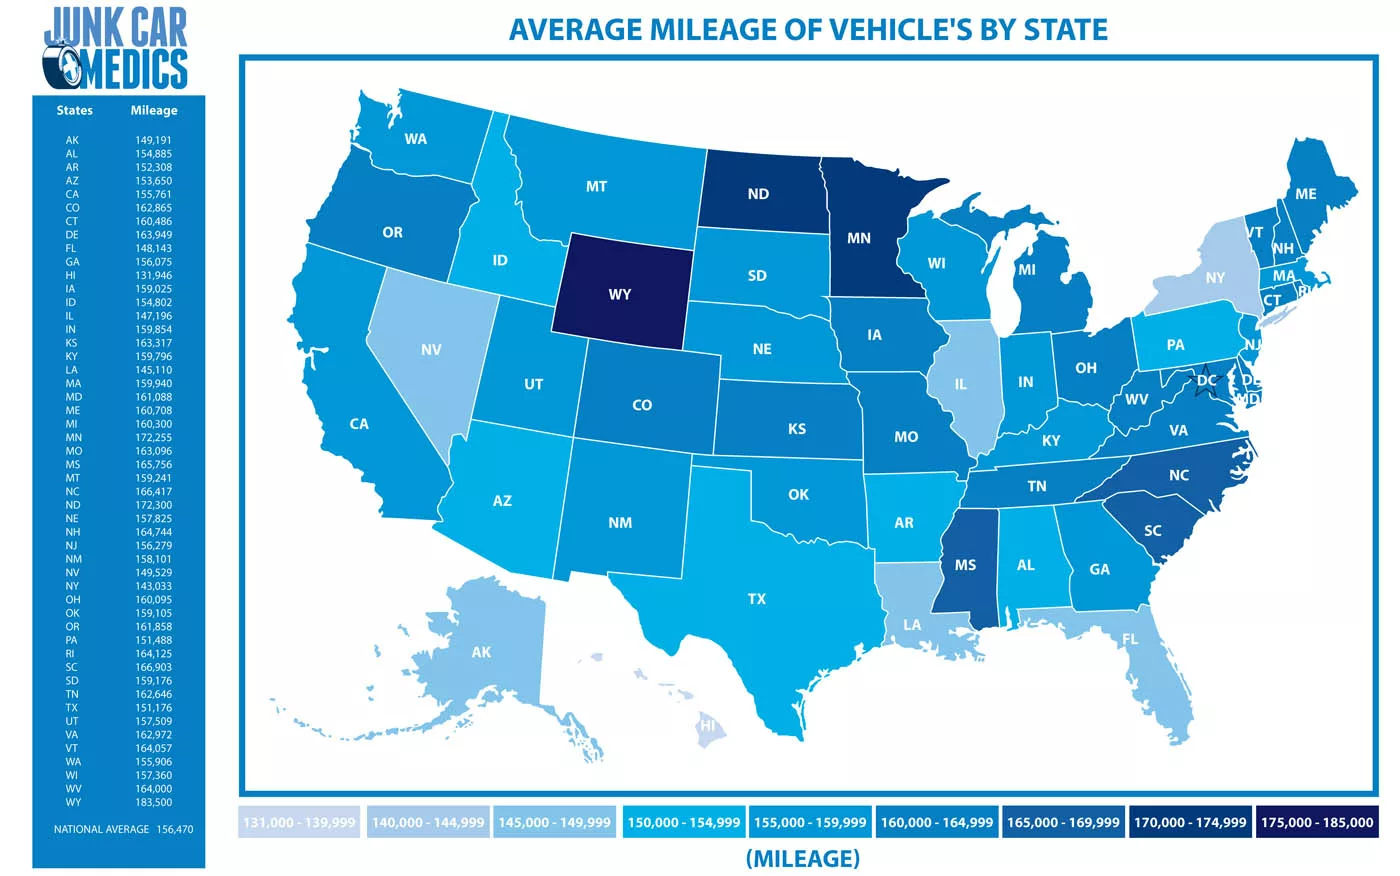 Average mileage of vehicles by state